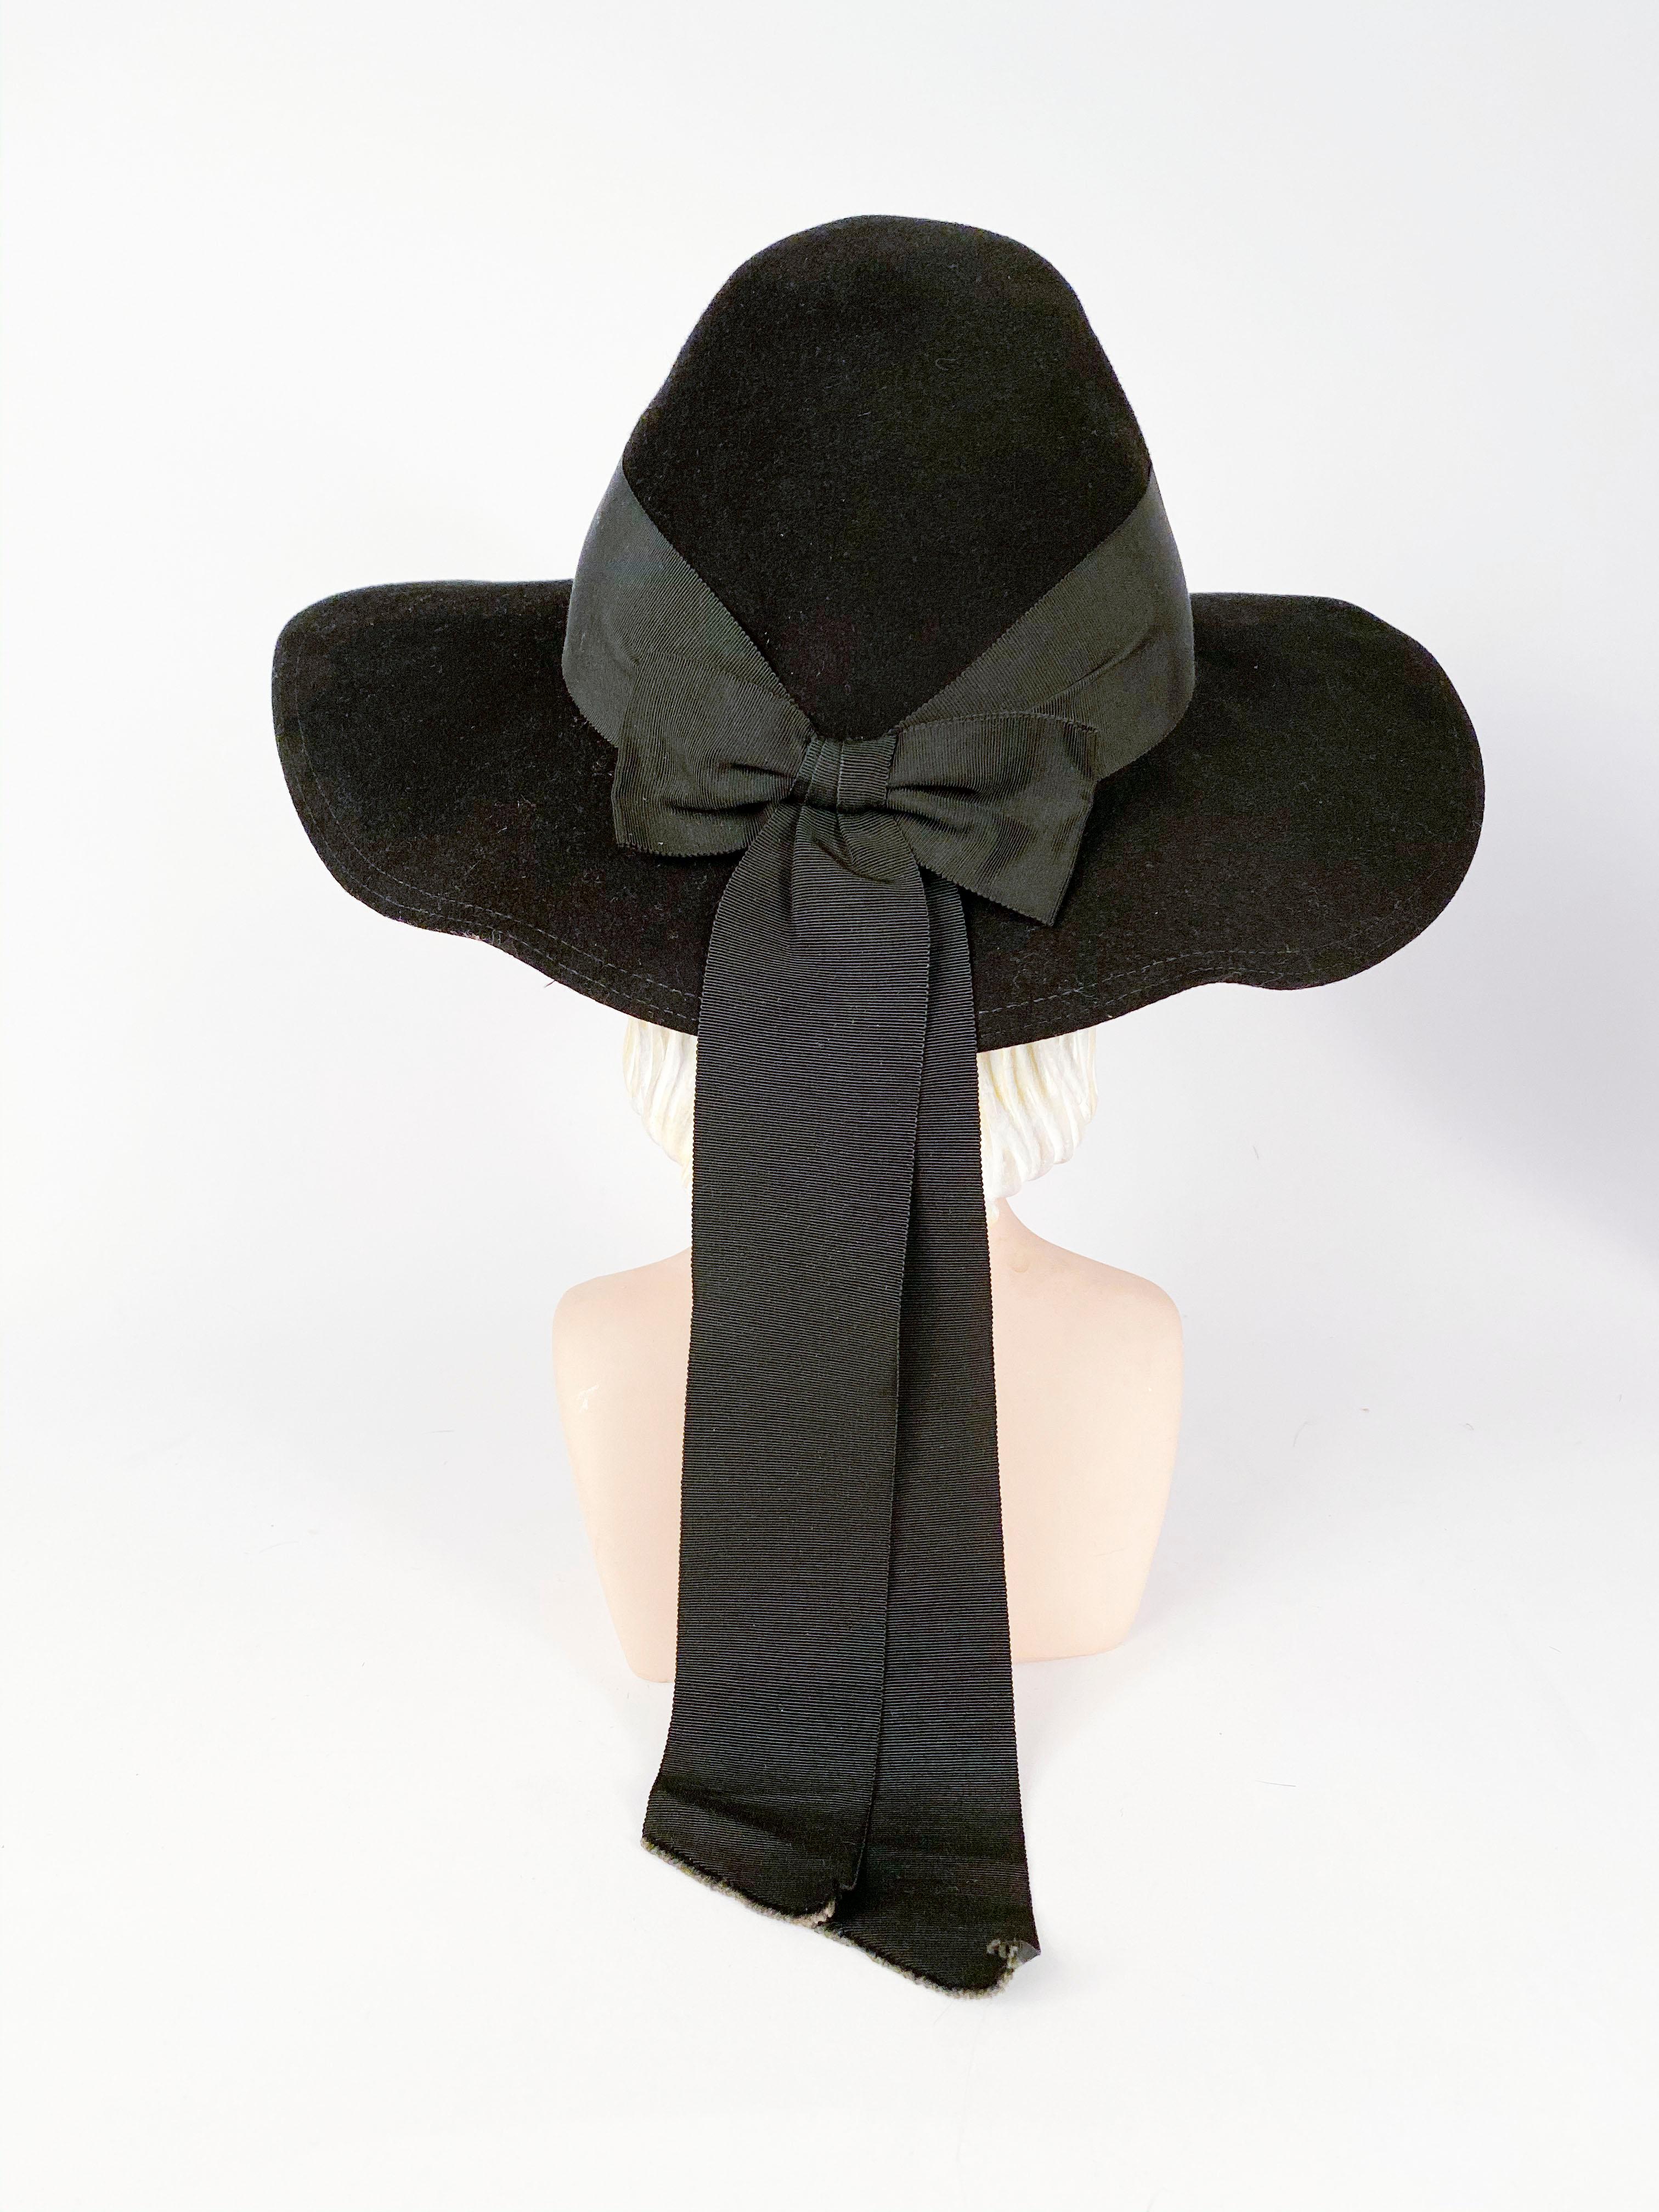 Women's or Men's 1930s Black Fur Felt Day Hat with Bow Accents